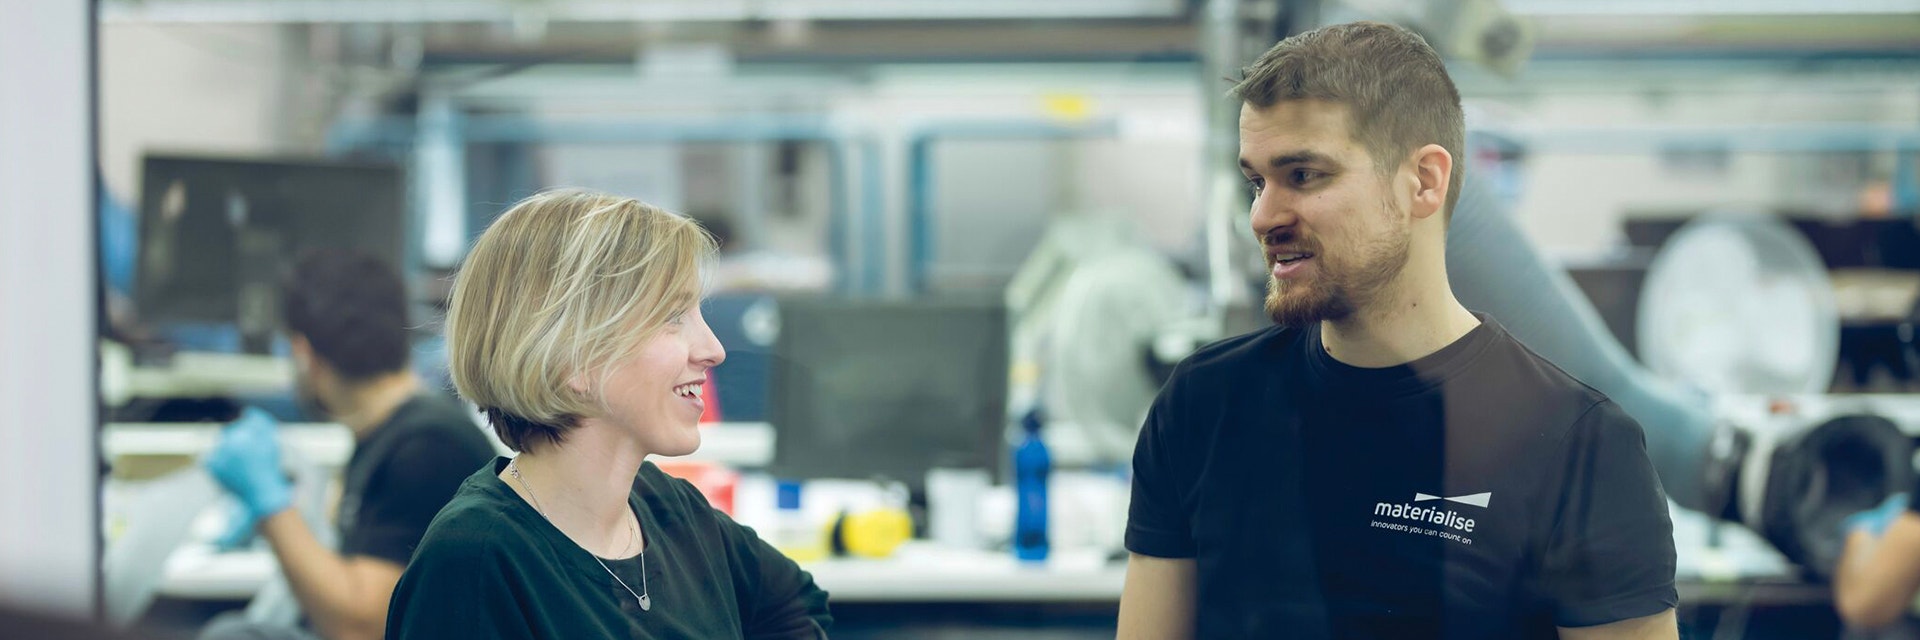 Materialise employees talking in a 3D printing factory